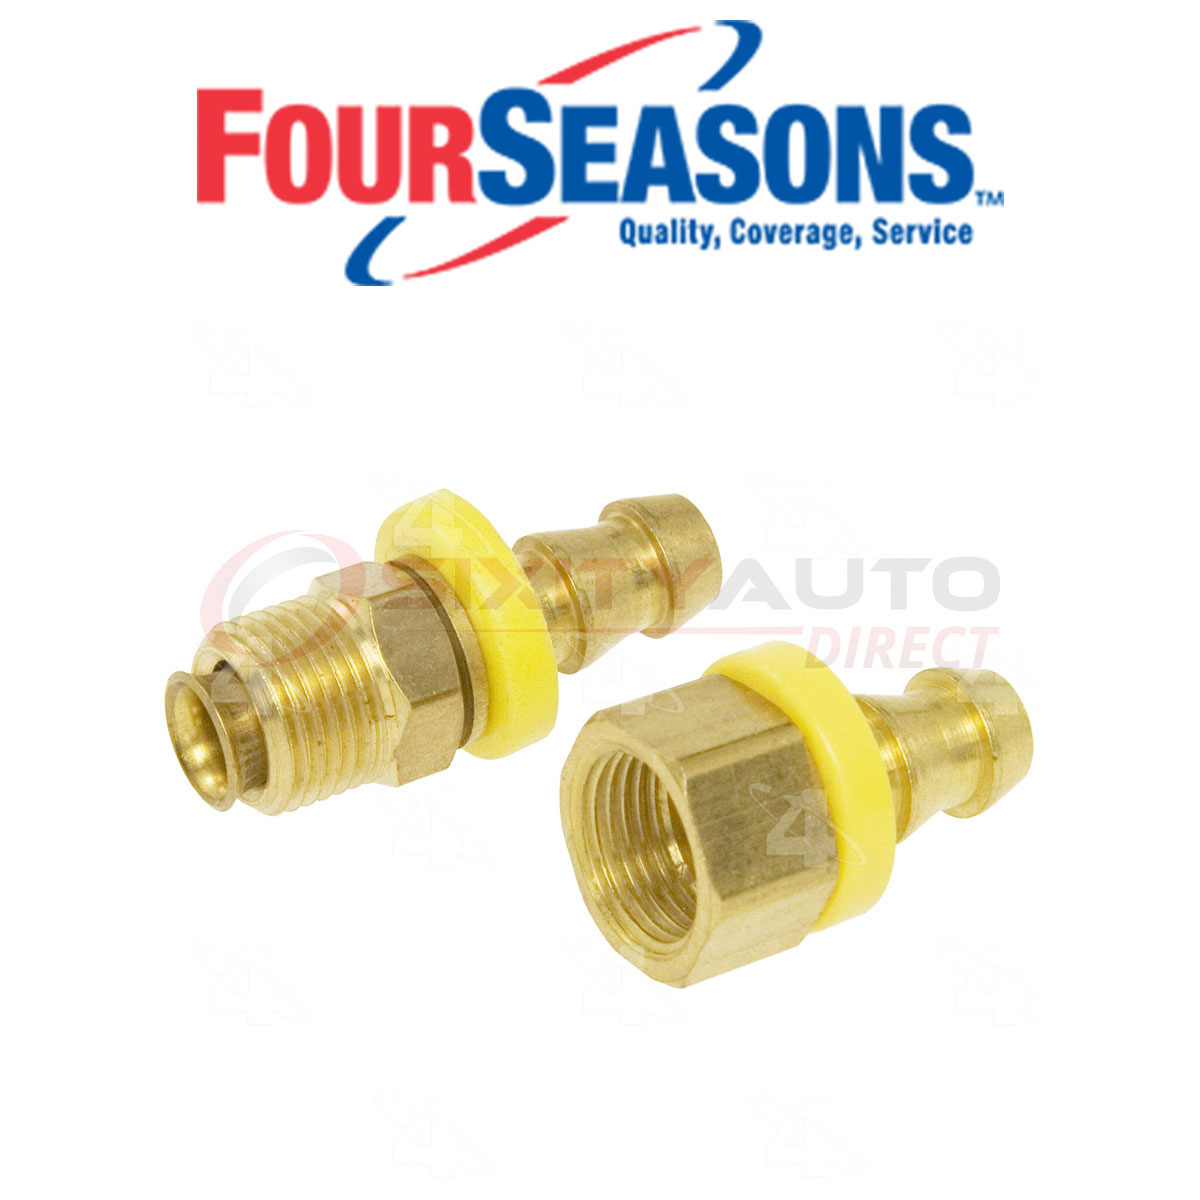 Four Seasons Transmission Oil Cooler Line Connector for 2002-2008 Cadillac sz | eBay 2003 Cadillac Cts Transmission Cooler Line Fitting